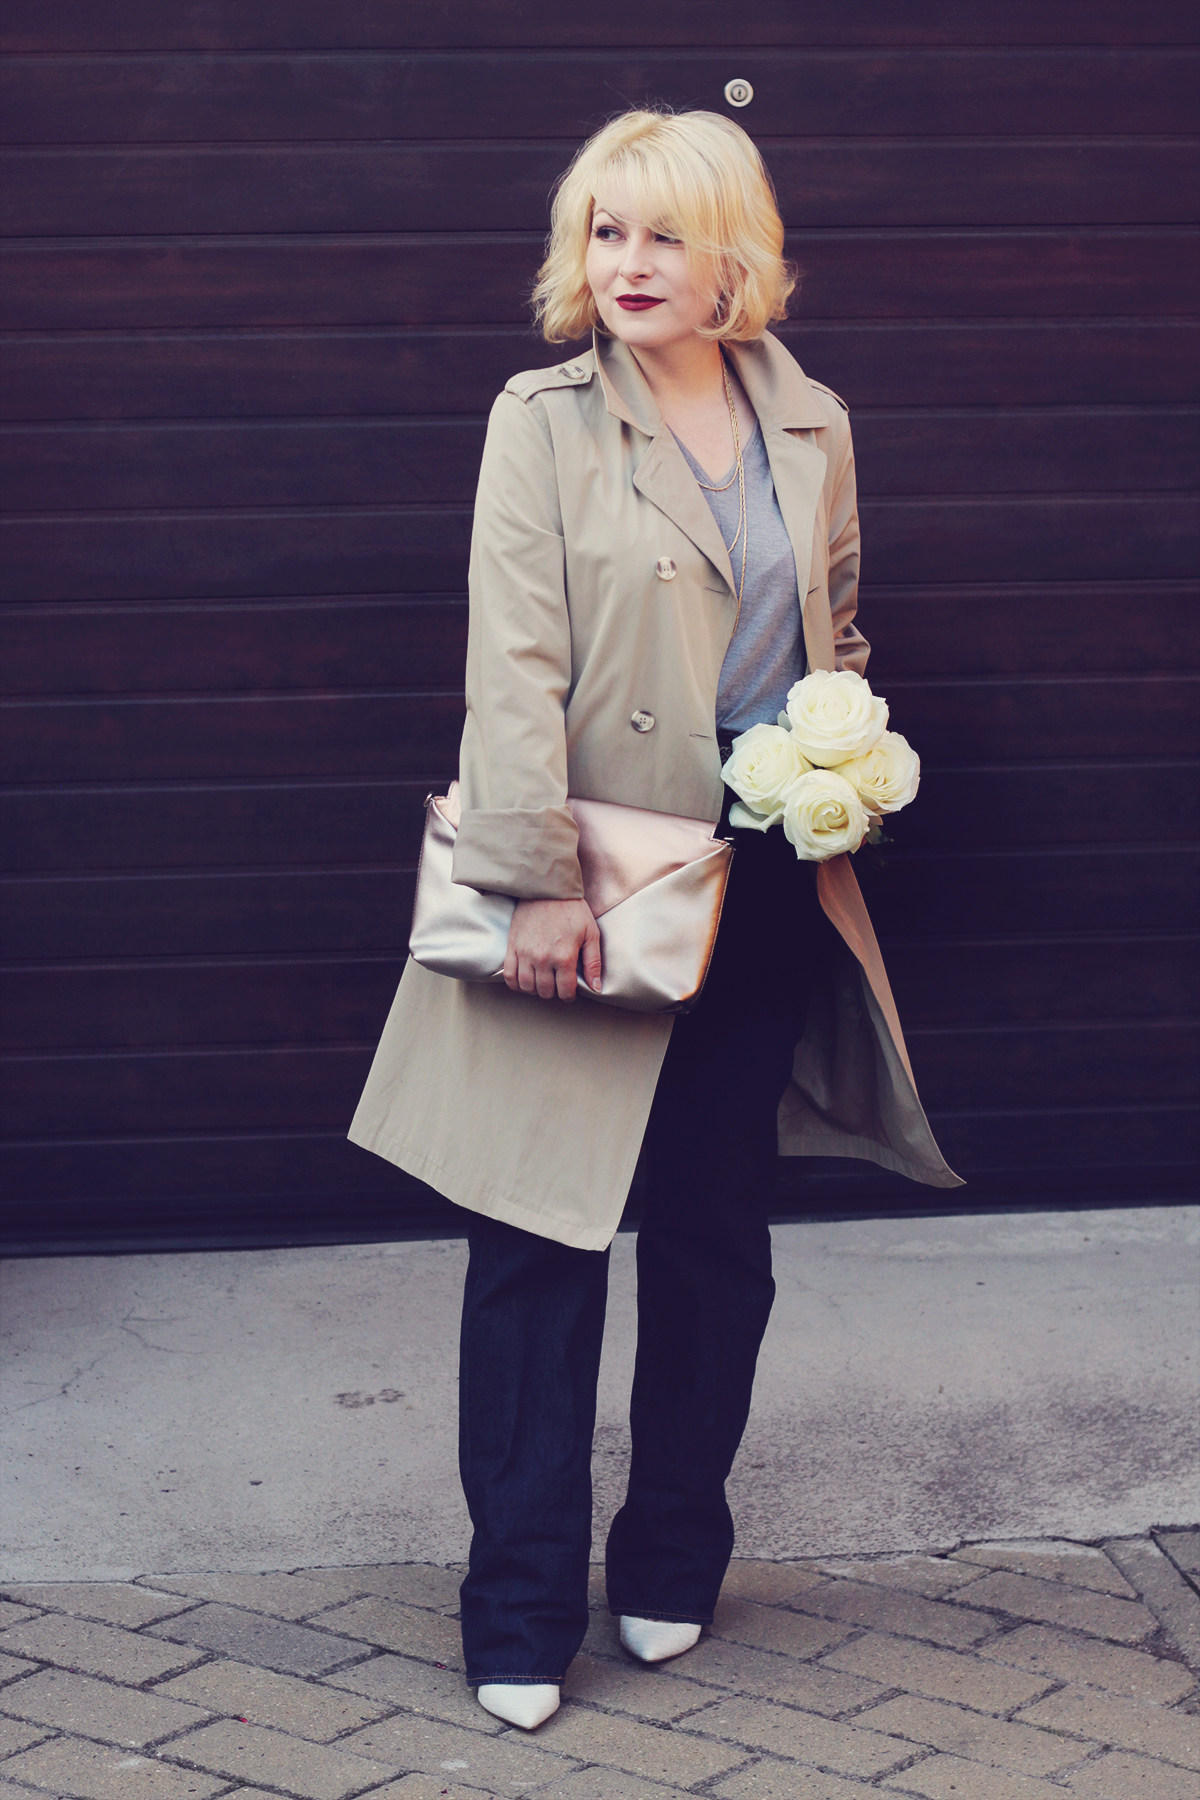 brunch date look, how to wear your boyfriend's jeans, levi's jeans, trench coat, clutch, dior necklace, grey t-shirt, white roses, white pumps, dark lips